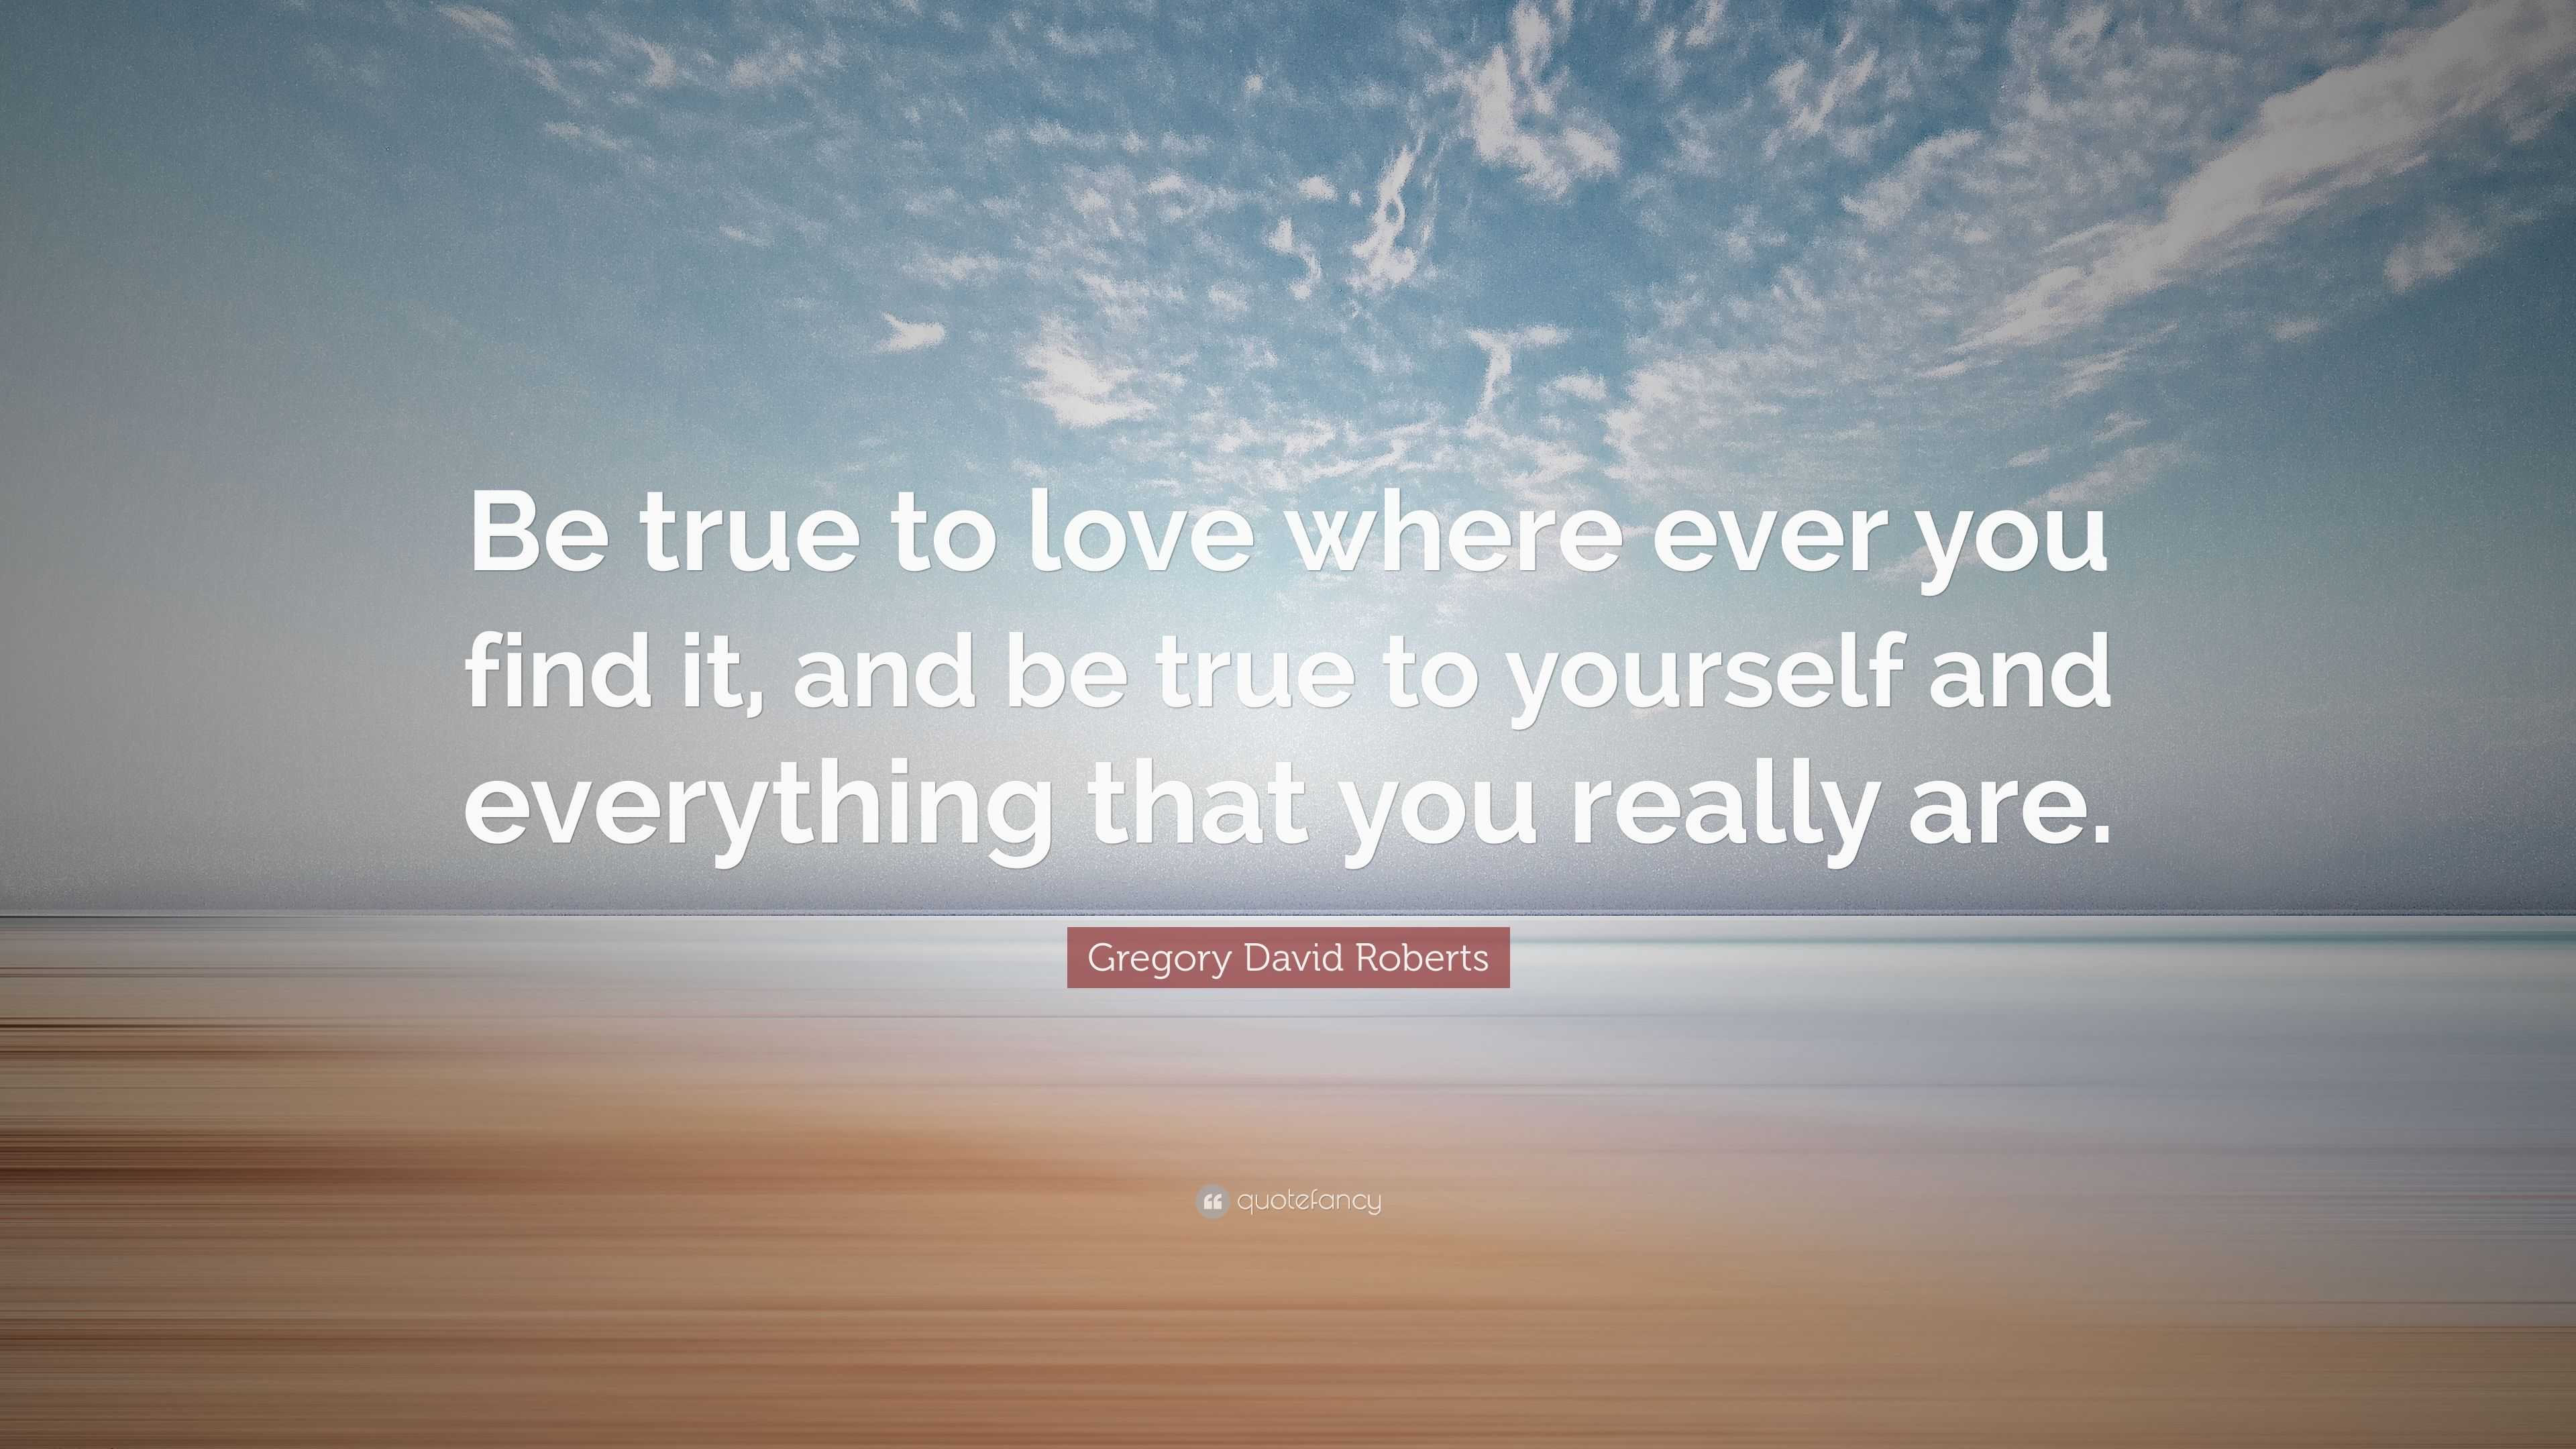 Gregory David Roberts Quote: “Be true to love where ever you find it ...